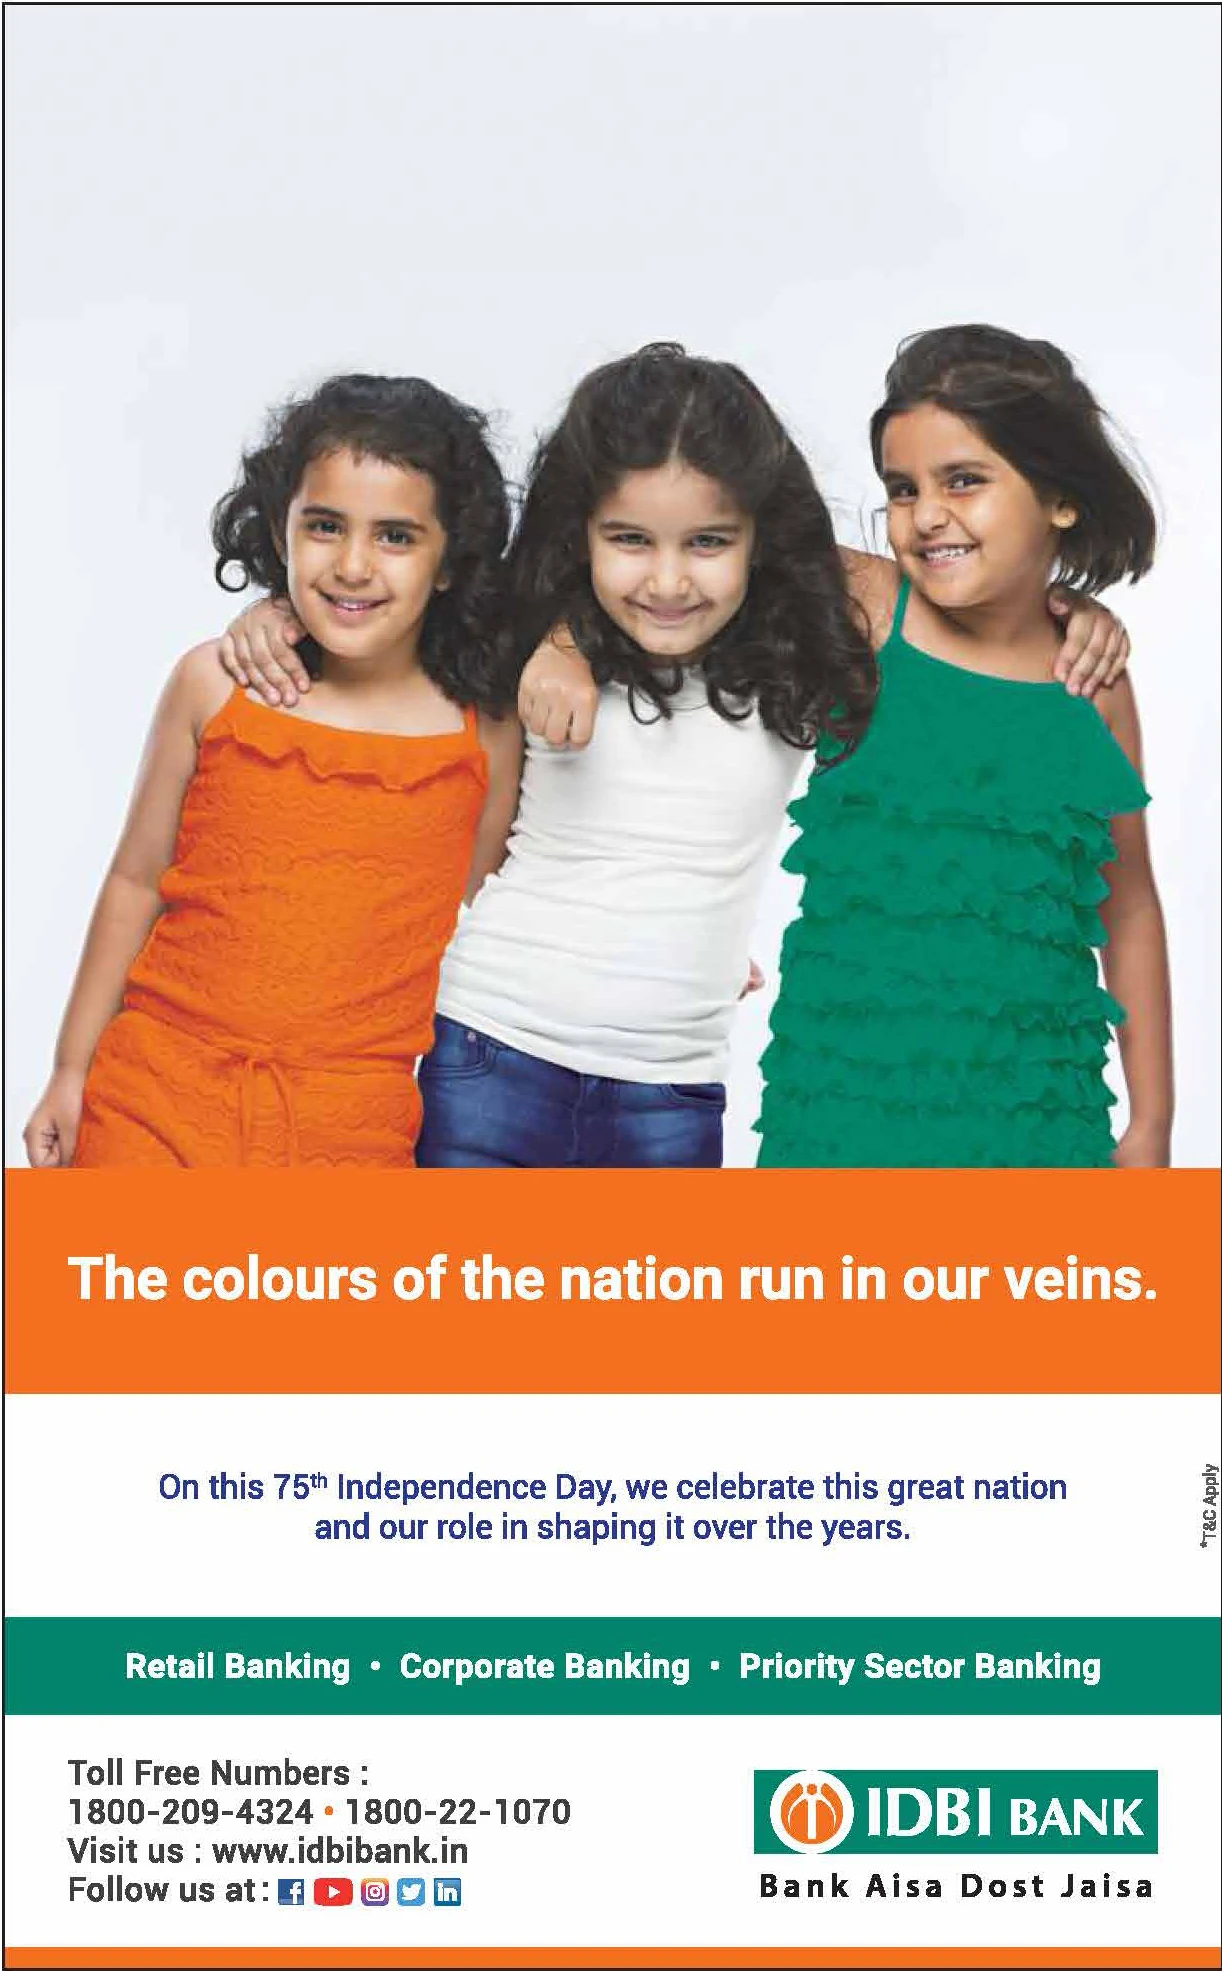 #6 IDBI Bank: The colours of the nation run in our veins